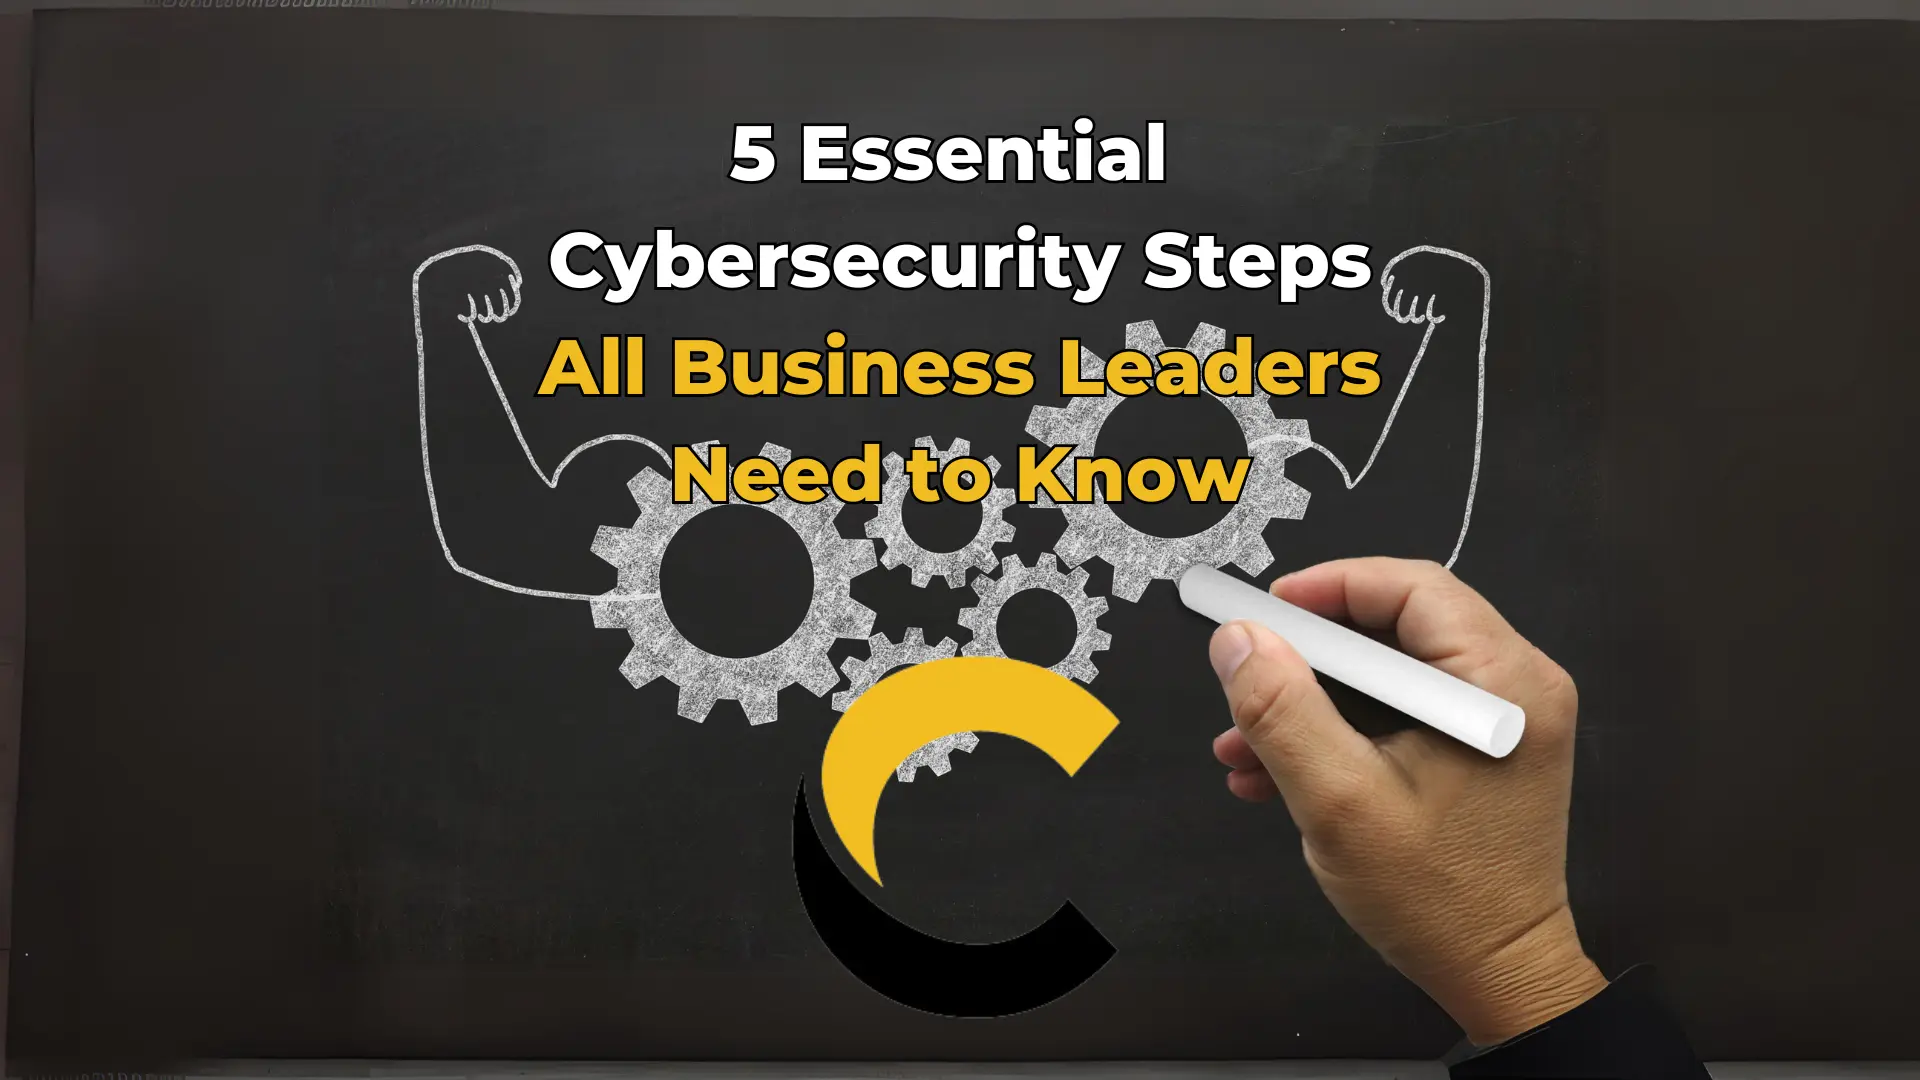 5 Essential Cybersecurity Steps All Business Leaders Need to Know